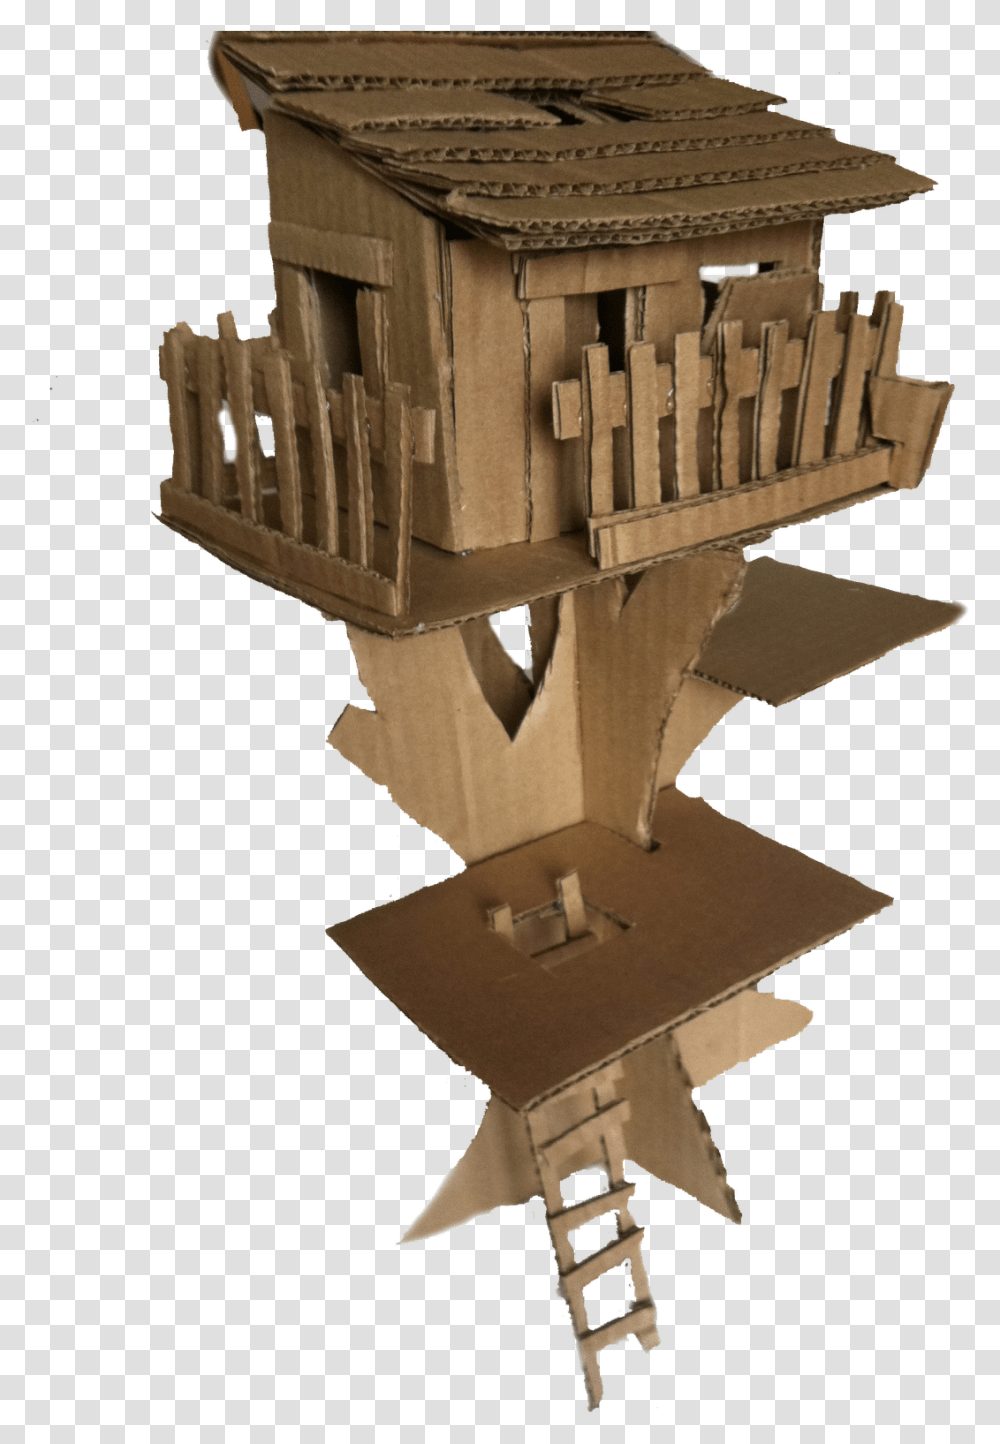 My Tree House Cardboard Tree House Model, Wood, Cross, Symbol, Plywood Transparent Png